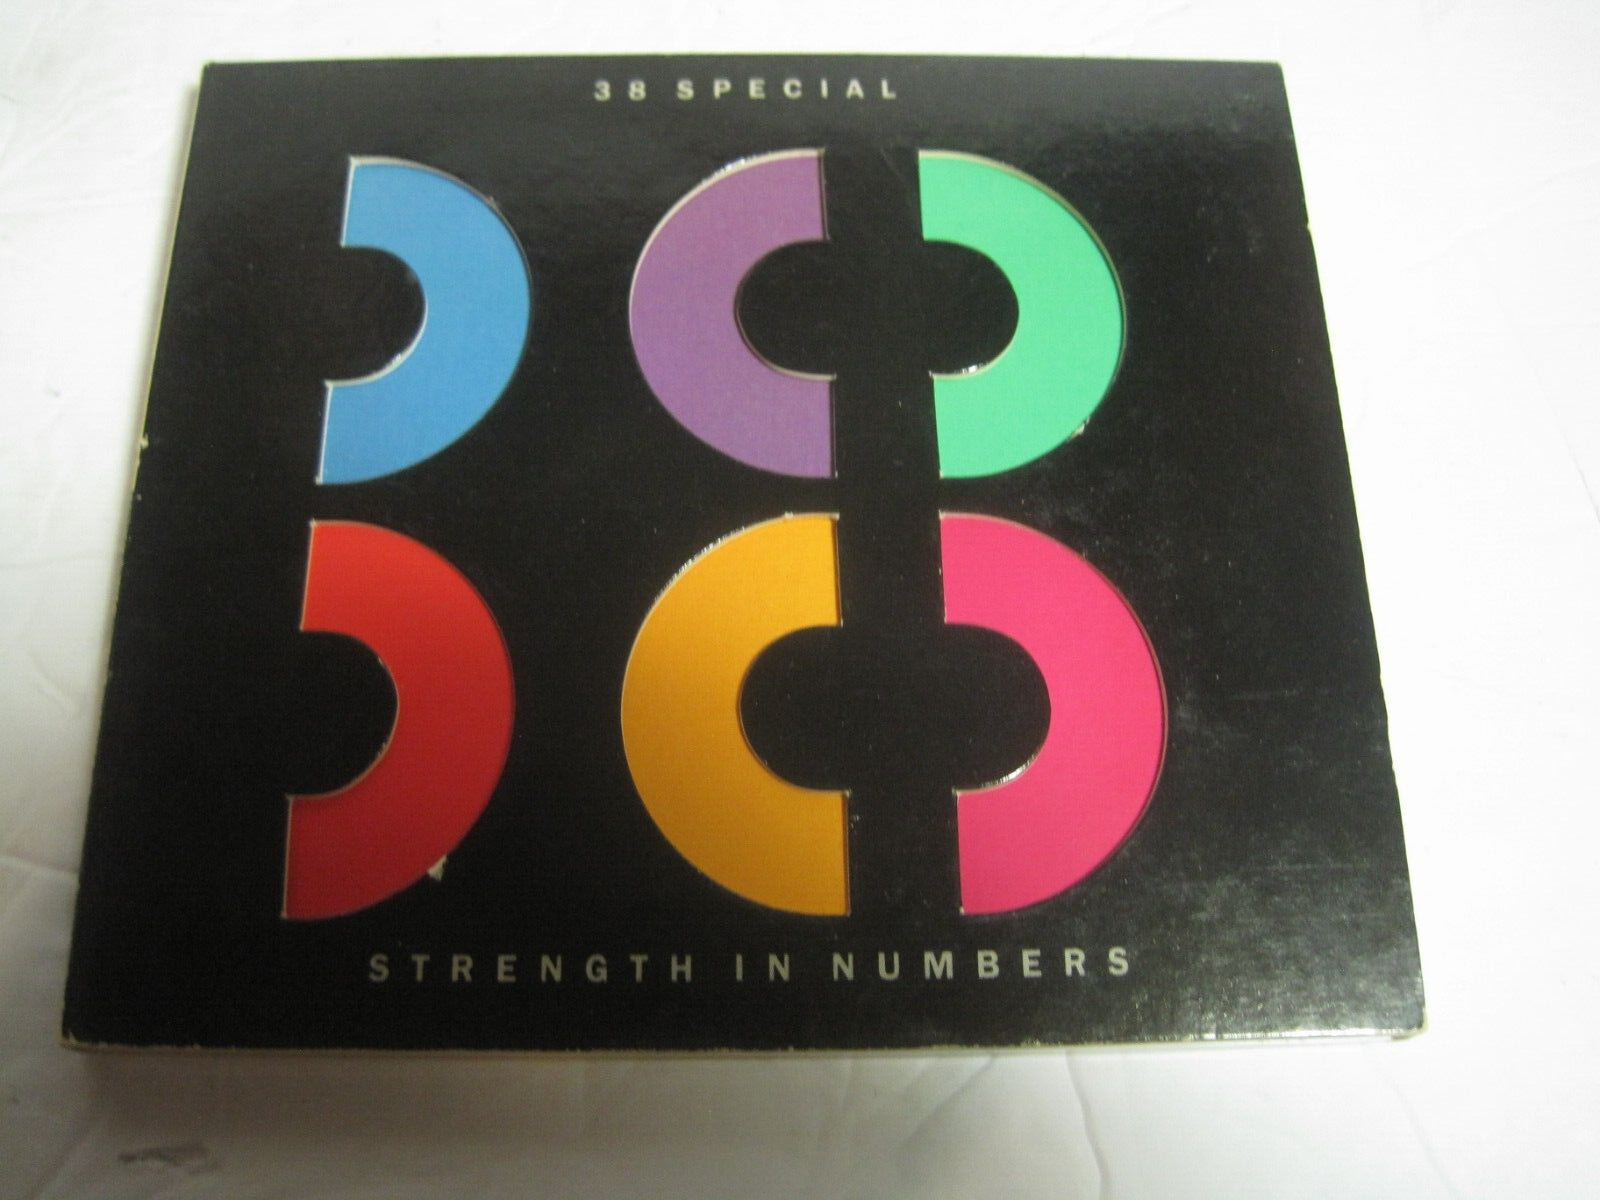 RARE 38 SPECIAL - Strength In Numbers WEST GERMANY 1986 A&M CD